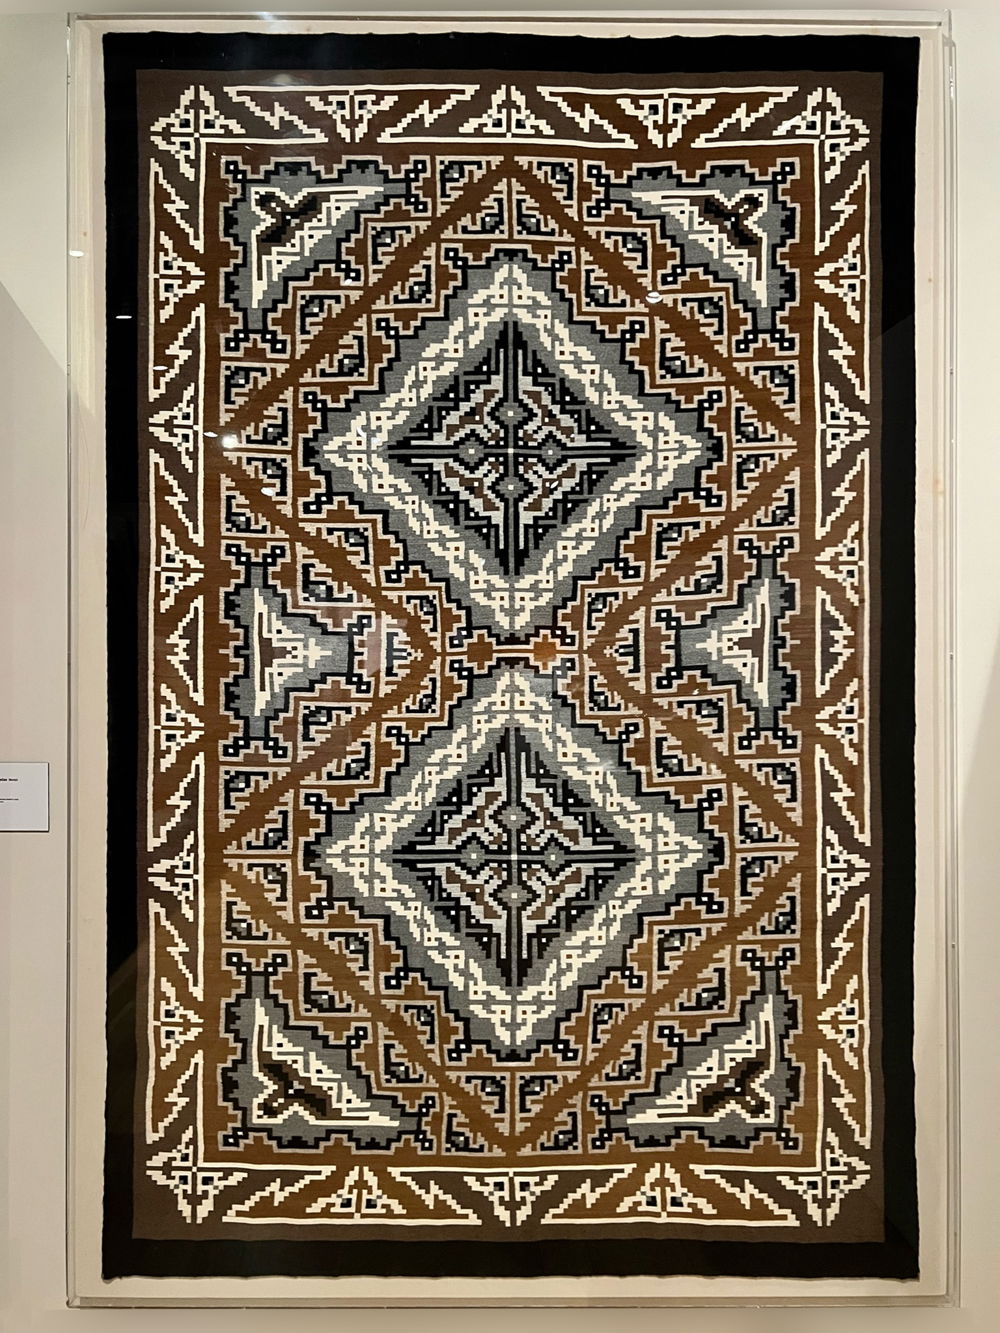 An intricately-patterned weaving in warm browns, whites, and grays with two central diamond shapes in the middle. Geometric patterns that resemble birds in flight point outward at each corner of the rectangle. Abstract patterns fill the space, drawing the eye around the artwork.